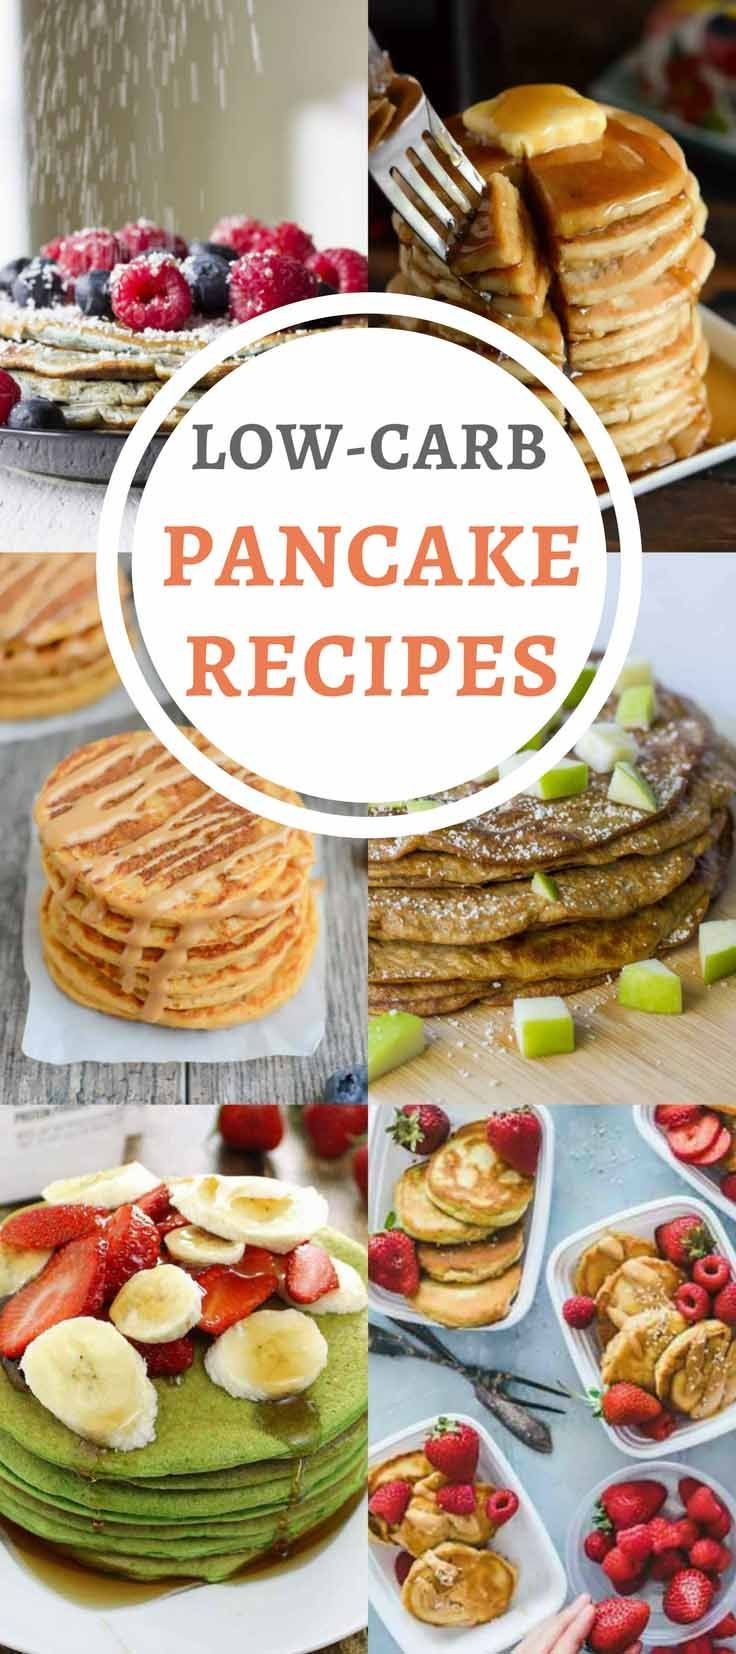 Low Carb Recipes Pinterest
 best Diabetes Low Carb Recipes And Articles images